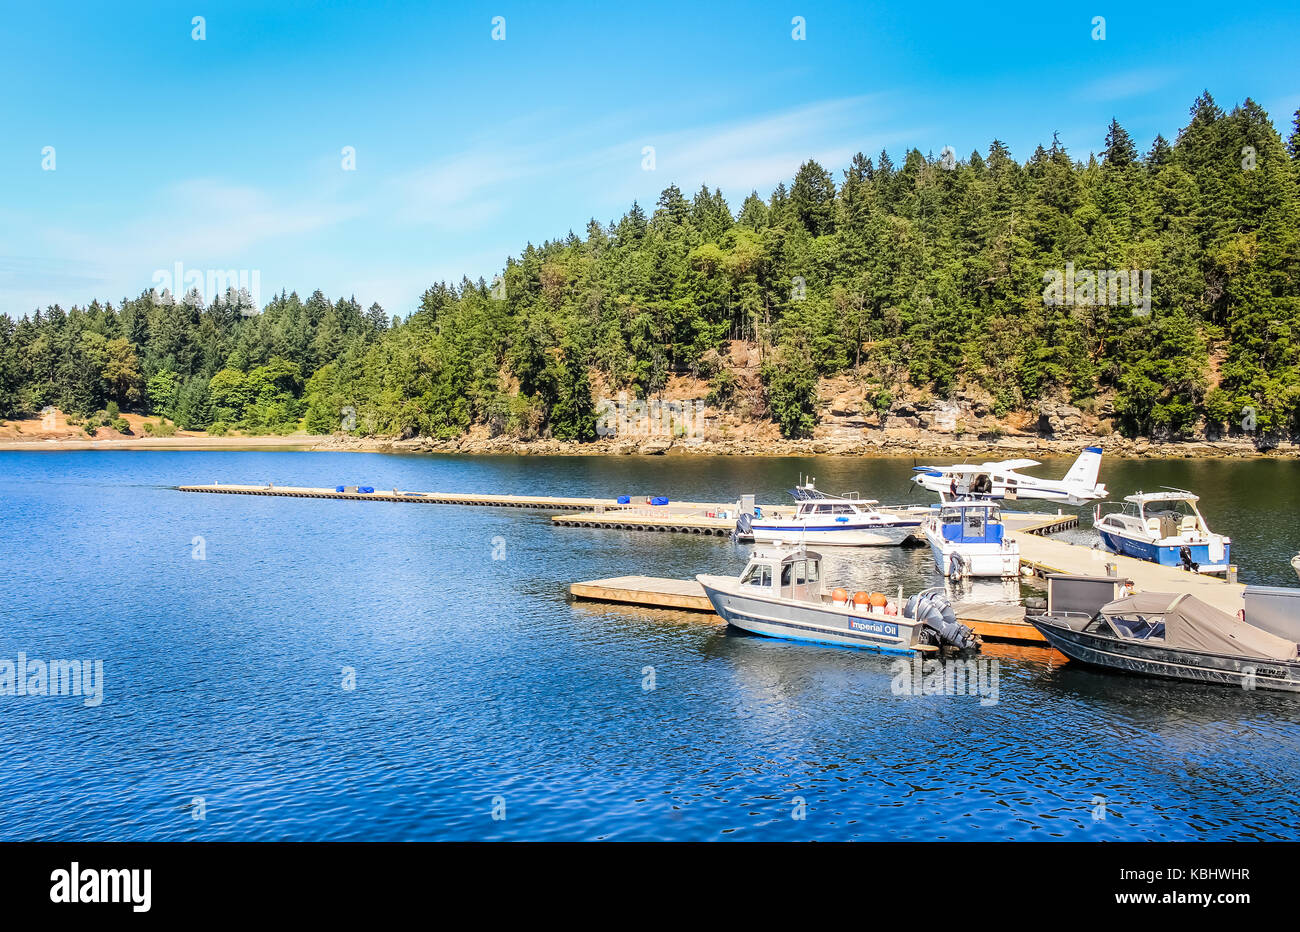 NANAIMO, BC - MARCH 2, 2016 - Boats docked at the seaplane terminal on March 2, 2016, in Nanaimo. Stock Photo